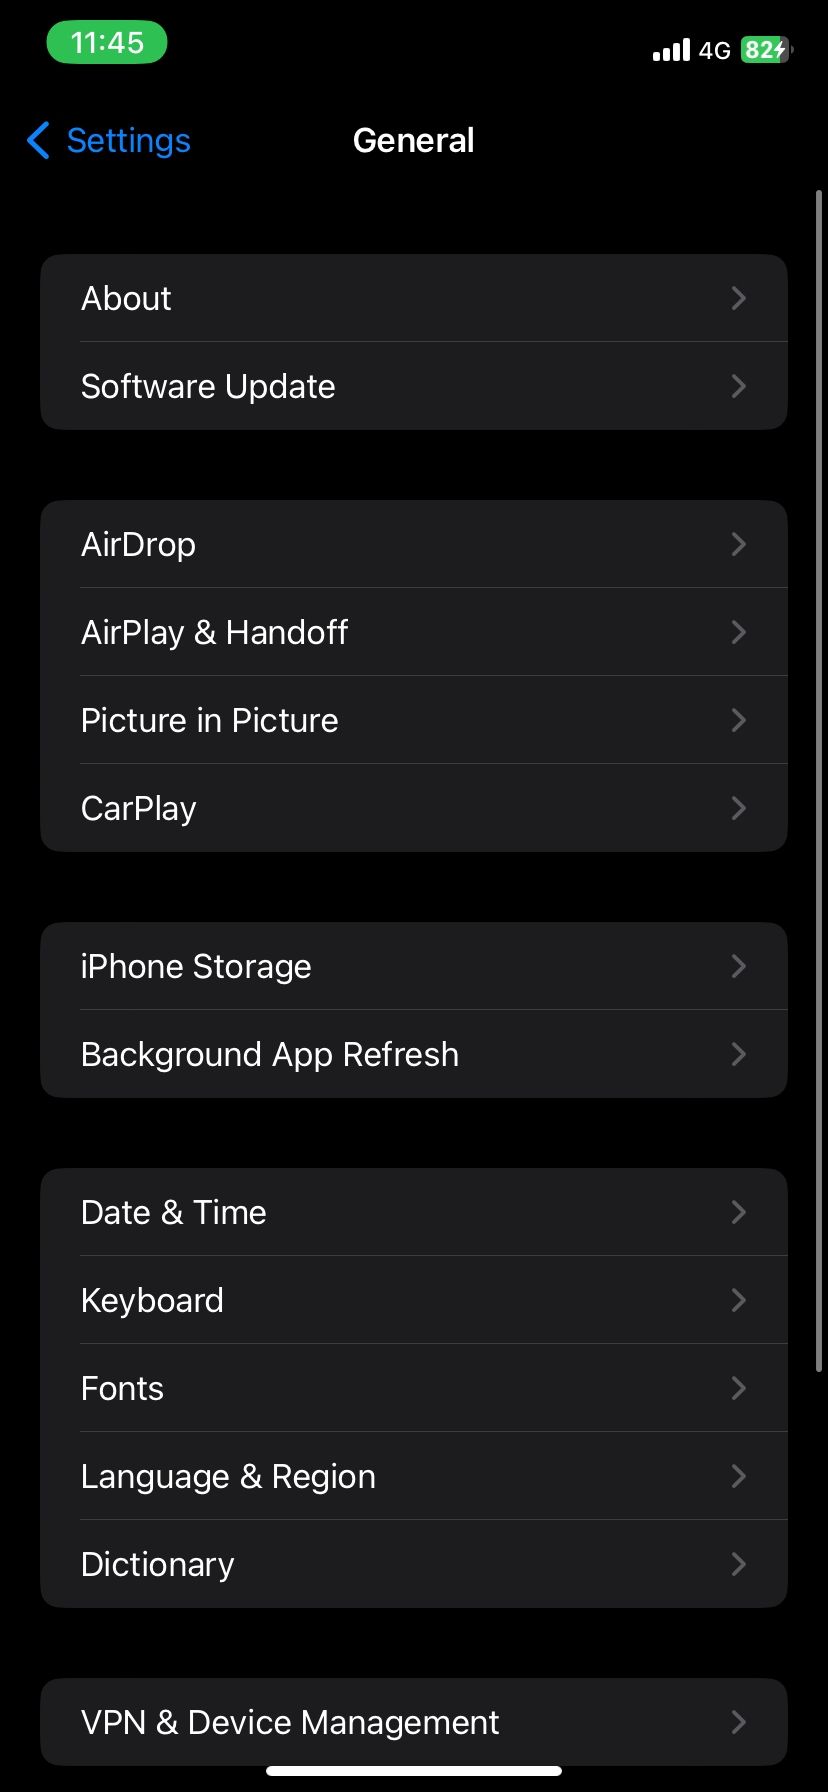 General settings options on iPhone